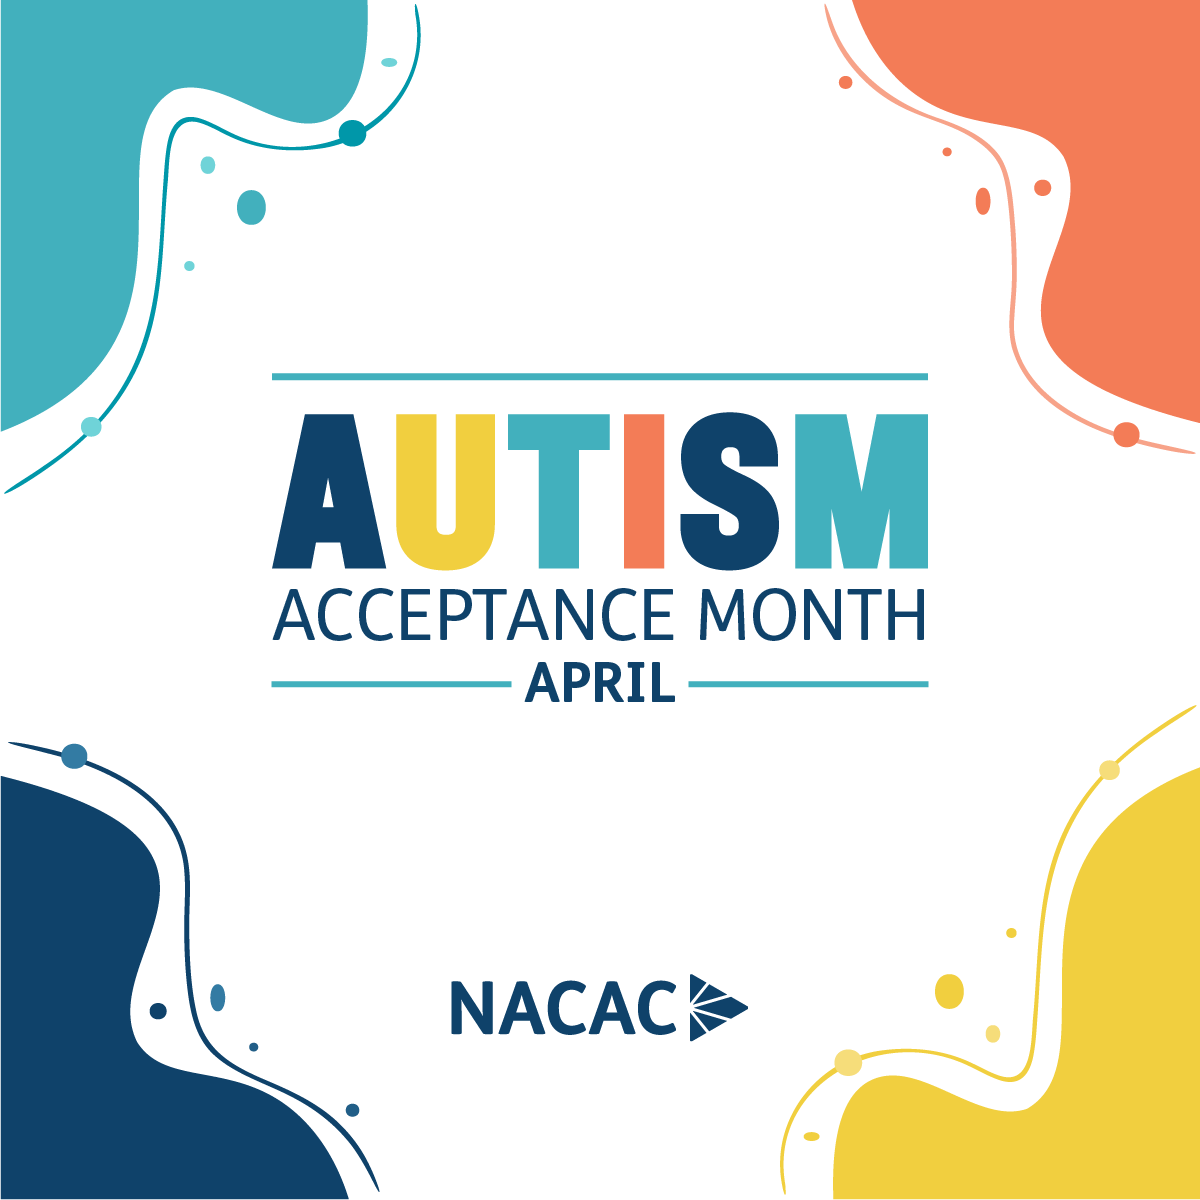 April is #AutismAcceptanceMonth. Let’s continue to support people with #Autism, celebrate #neurodiversity, and advocate for inclusive admission policies & welcoming campus communities. #AutismAcceptance